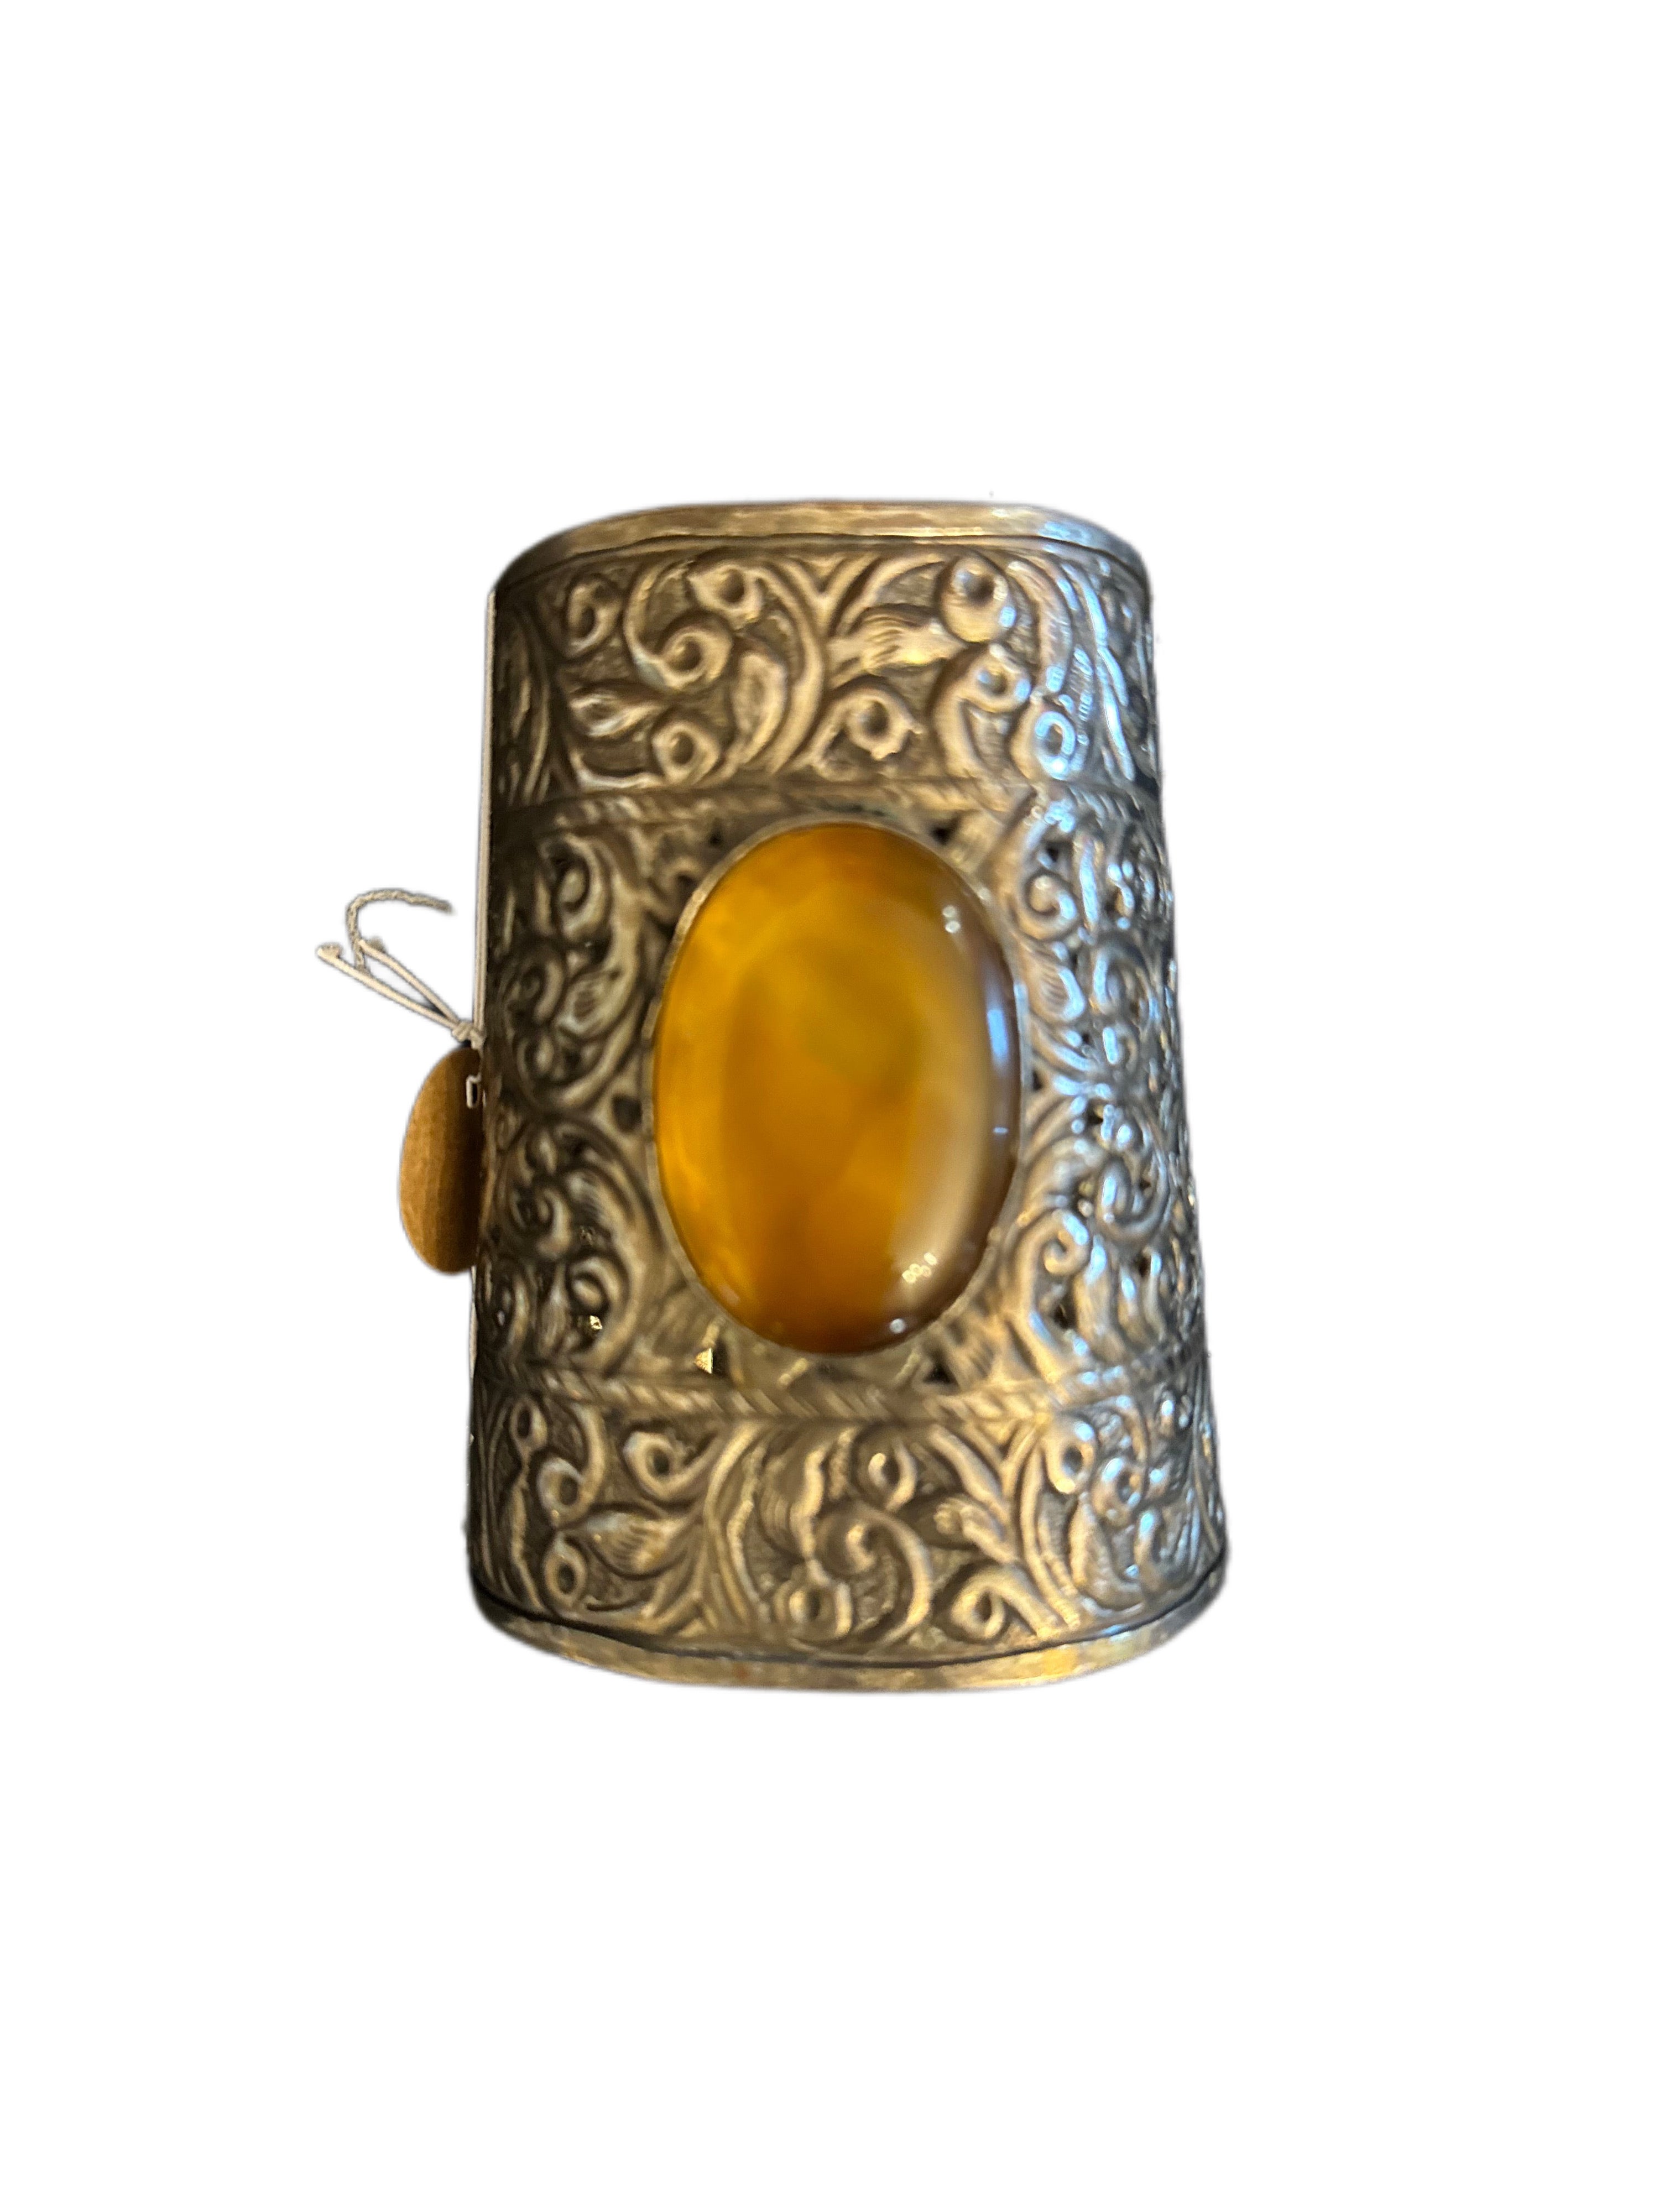 Large cuff bracelet with center stone